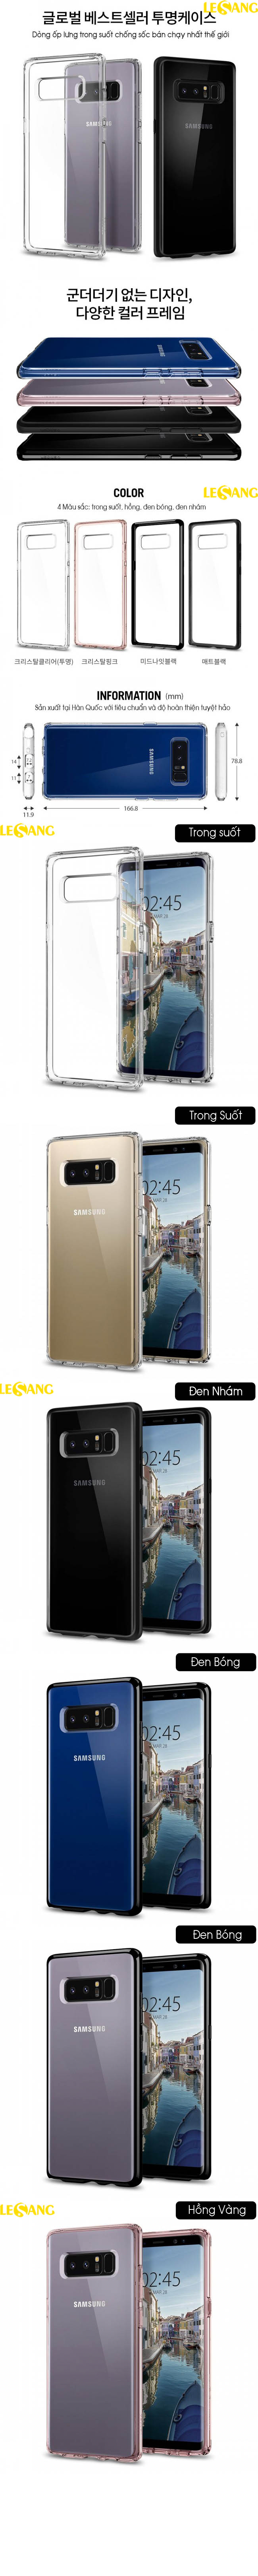 Ốp lưng Samsung Note 8 Ultra Hybrid trong suốt 55